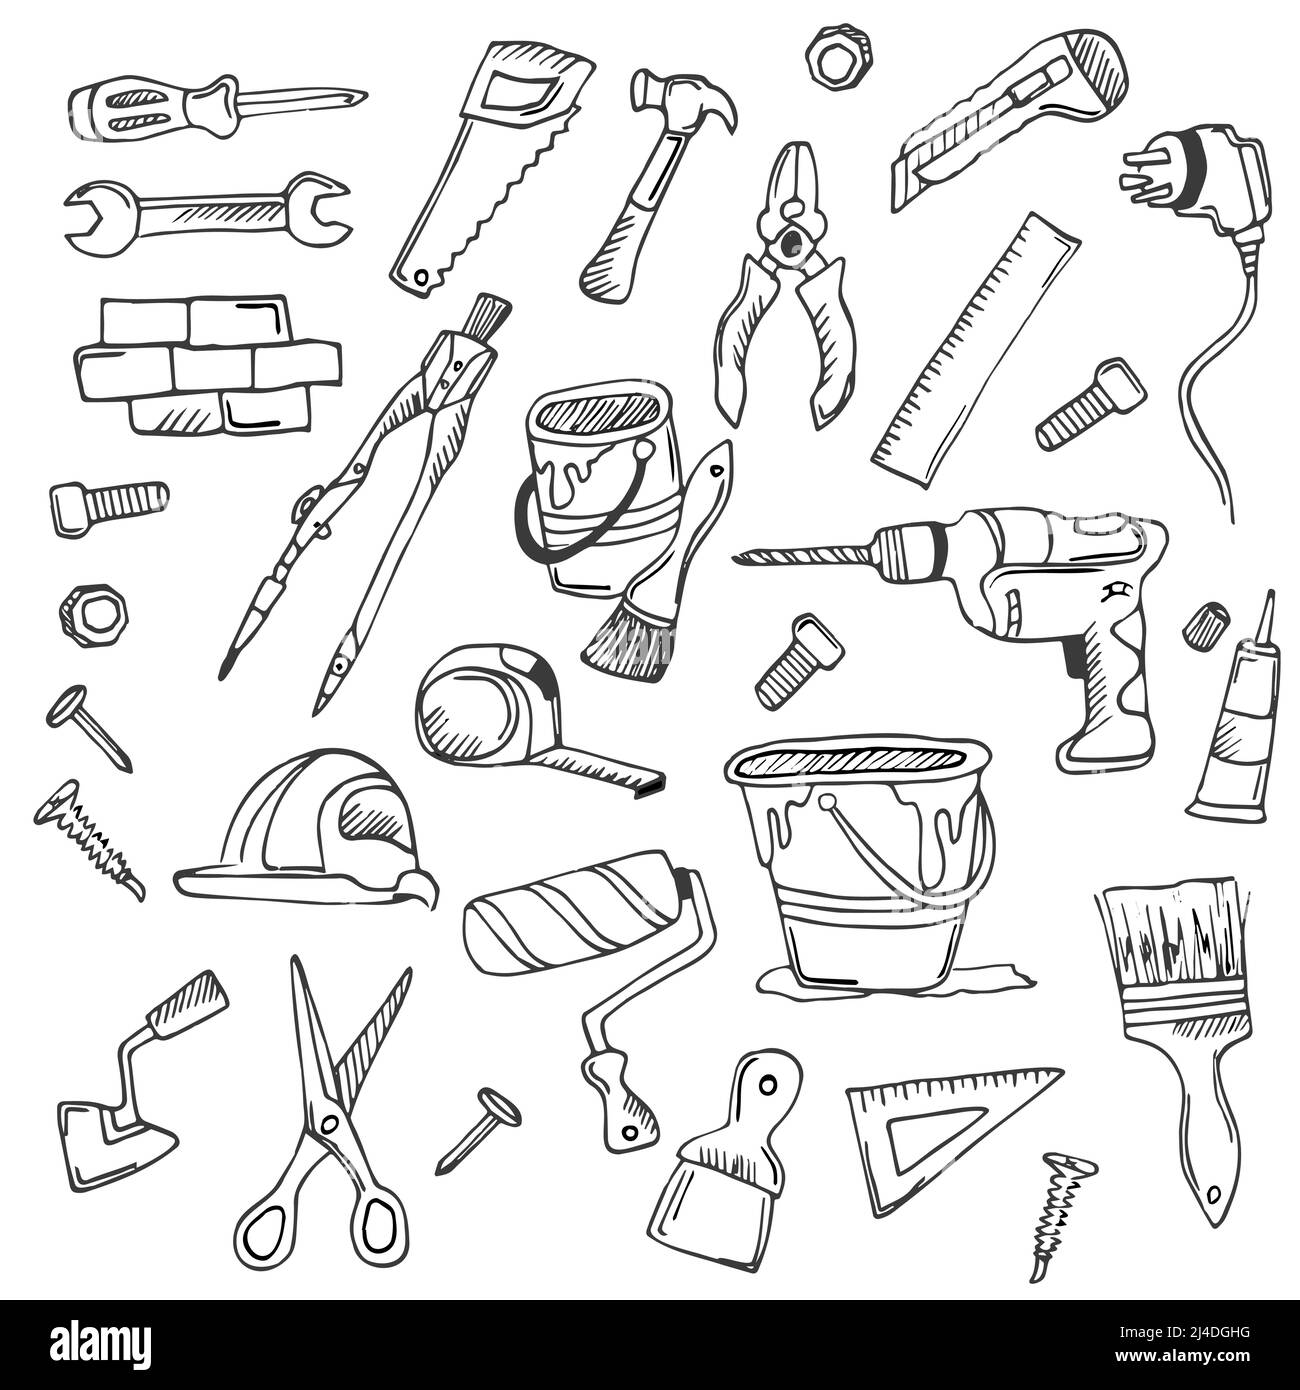 Big doodle set of home repair tools in doodle style. hand and electrical tools, wall painting and woodwork tools, different screwdrivers, drills, hamm Stock Vector